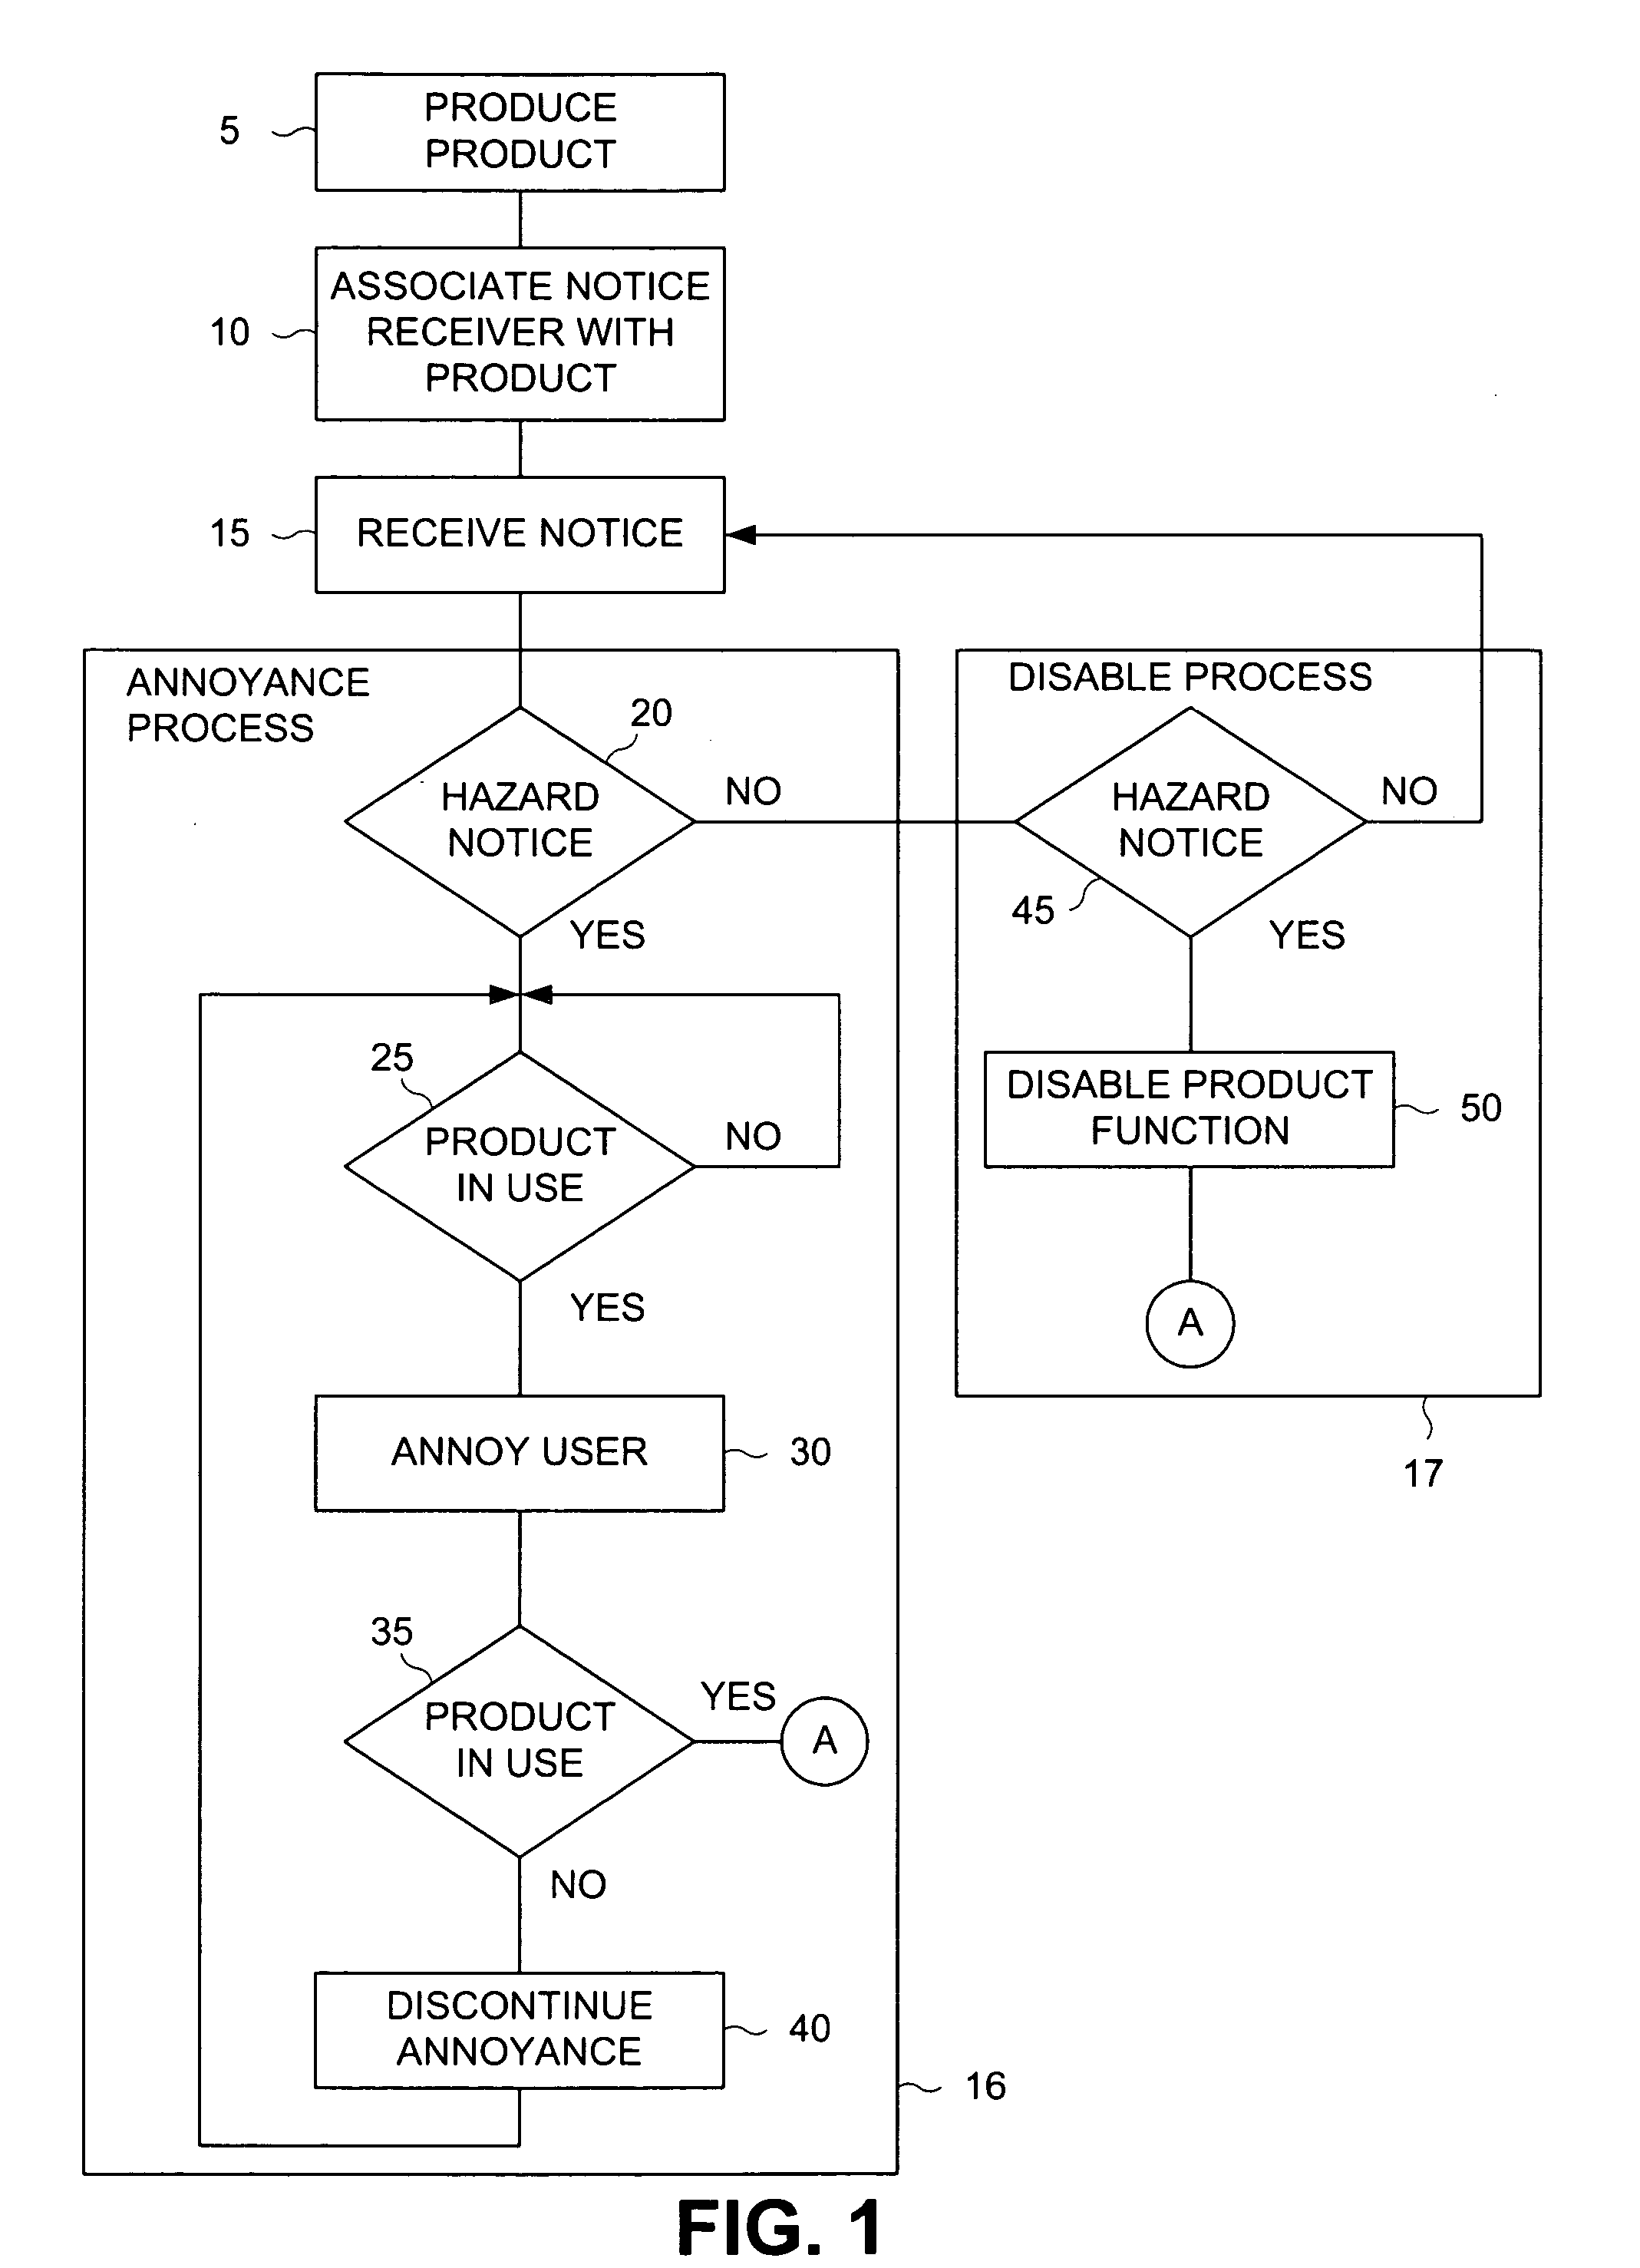 Method and apparatus for product-centric delivery of product user notices